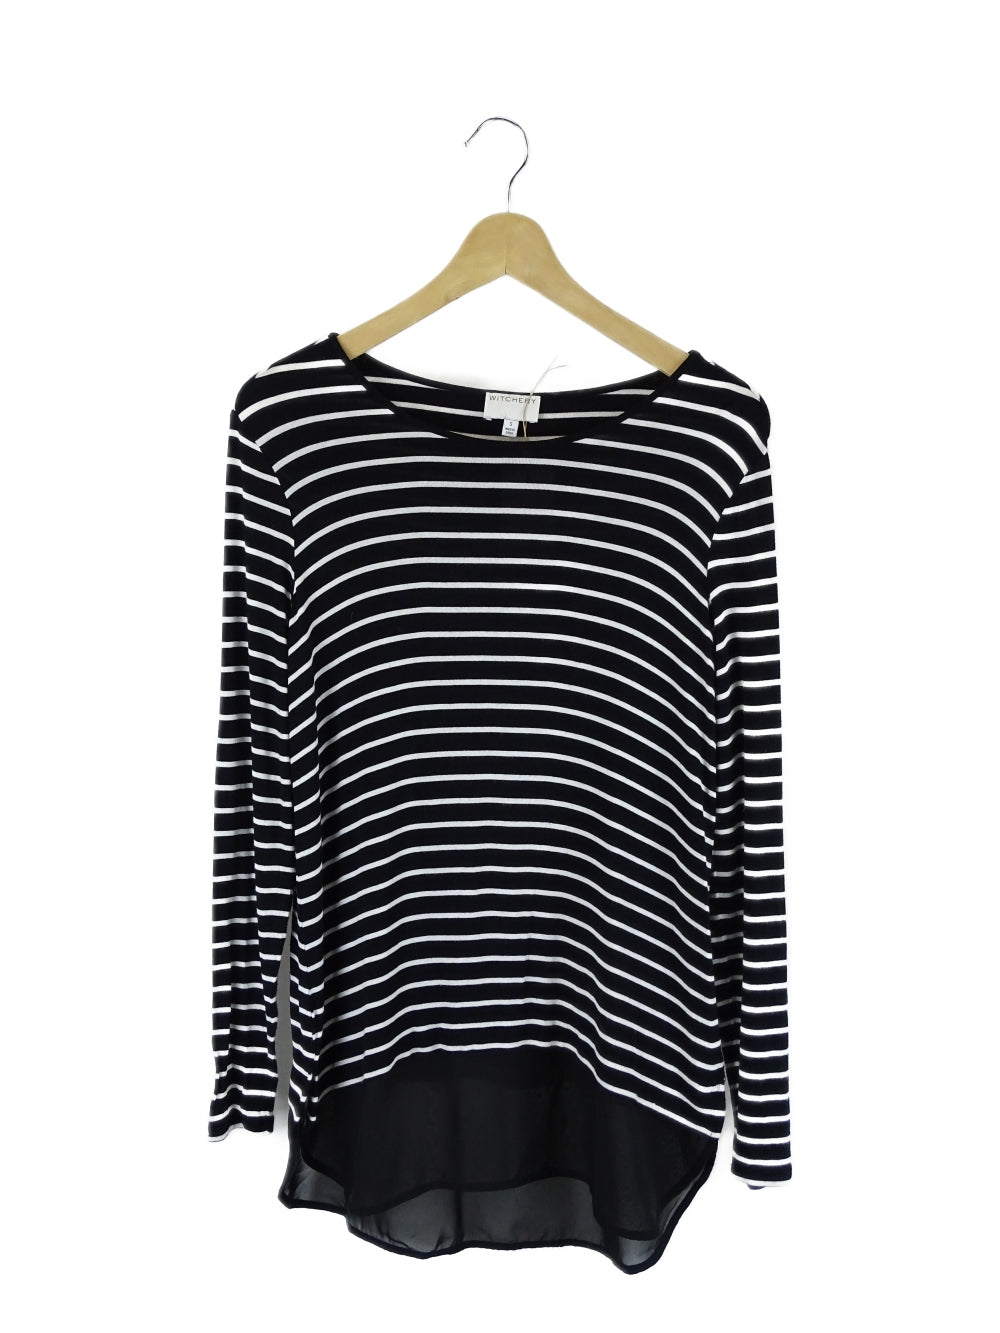 Witchery Black And White Long-Sleeve Top S